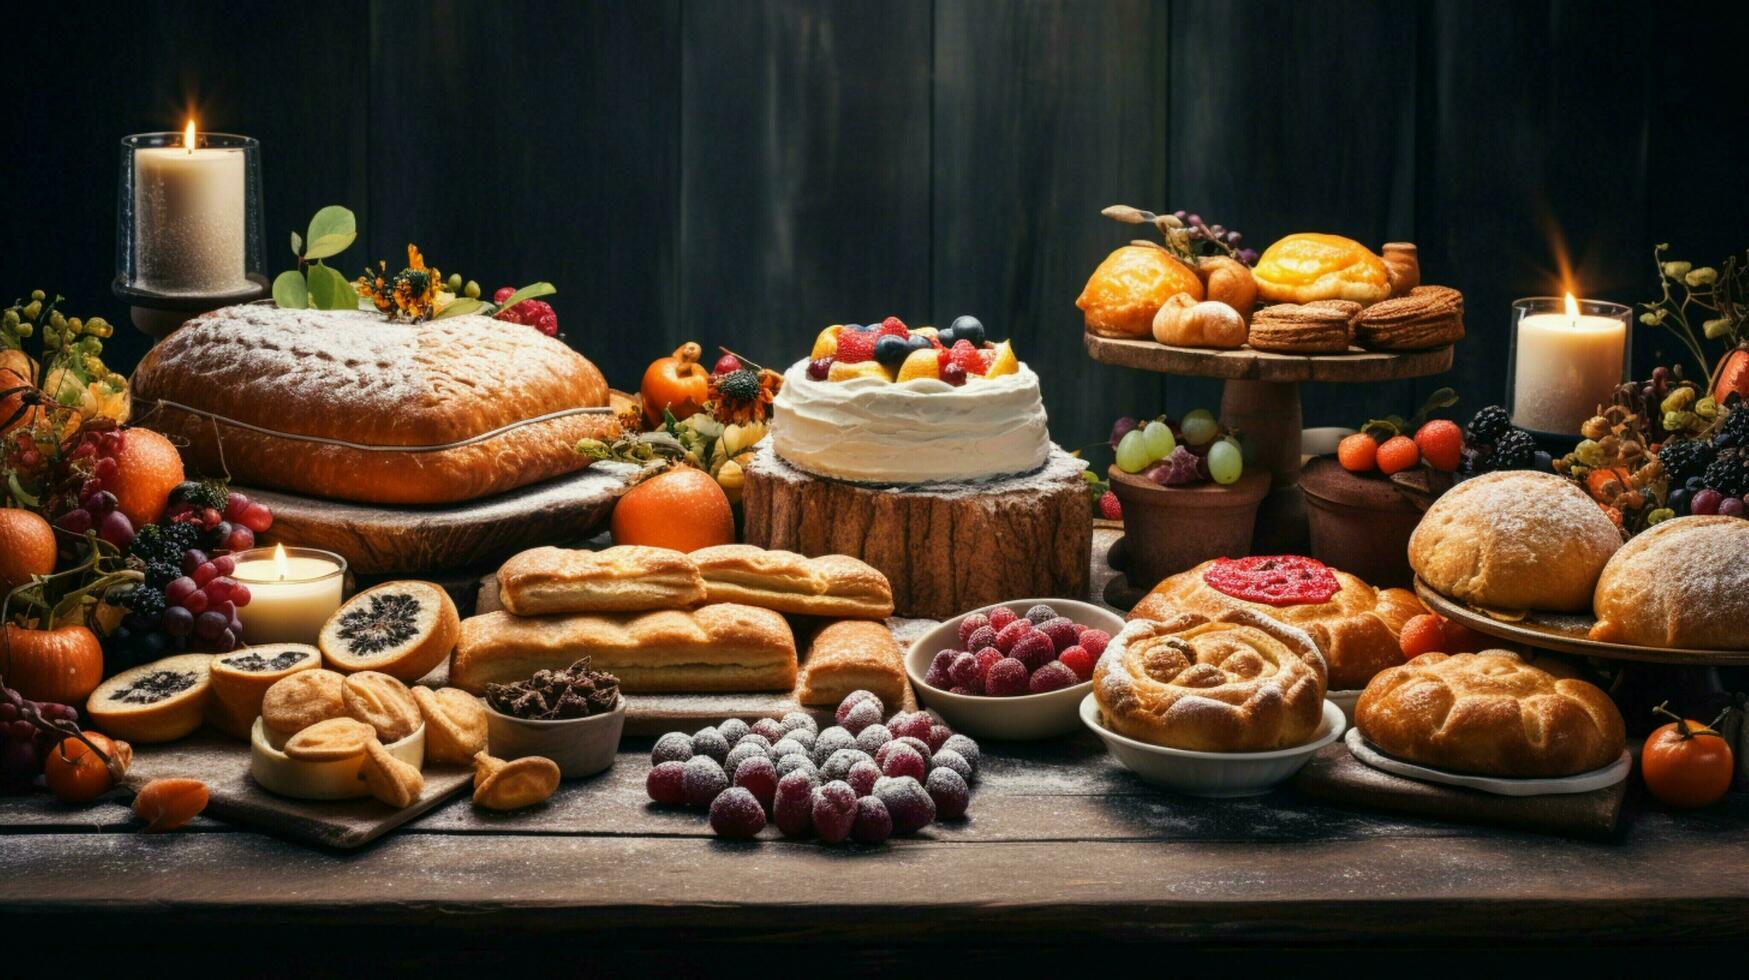 a festive table of baked goods in various shapes and color photo